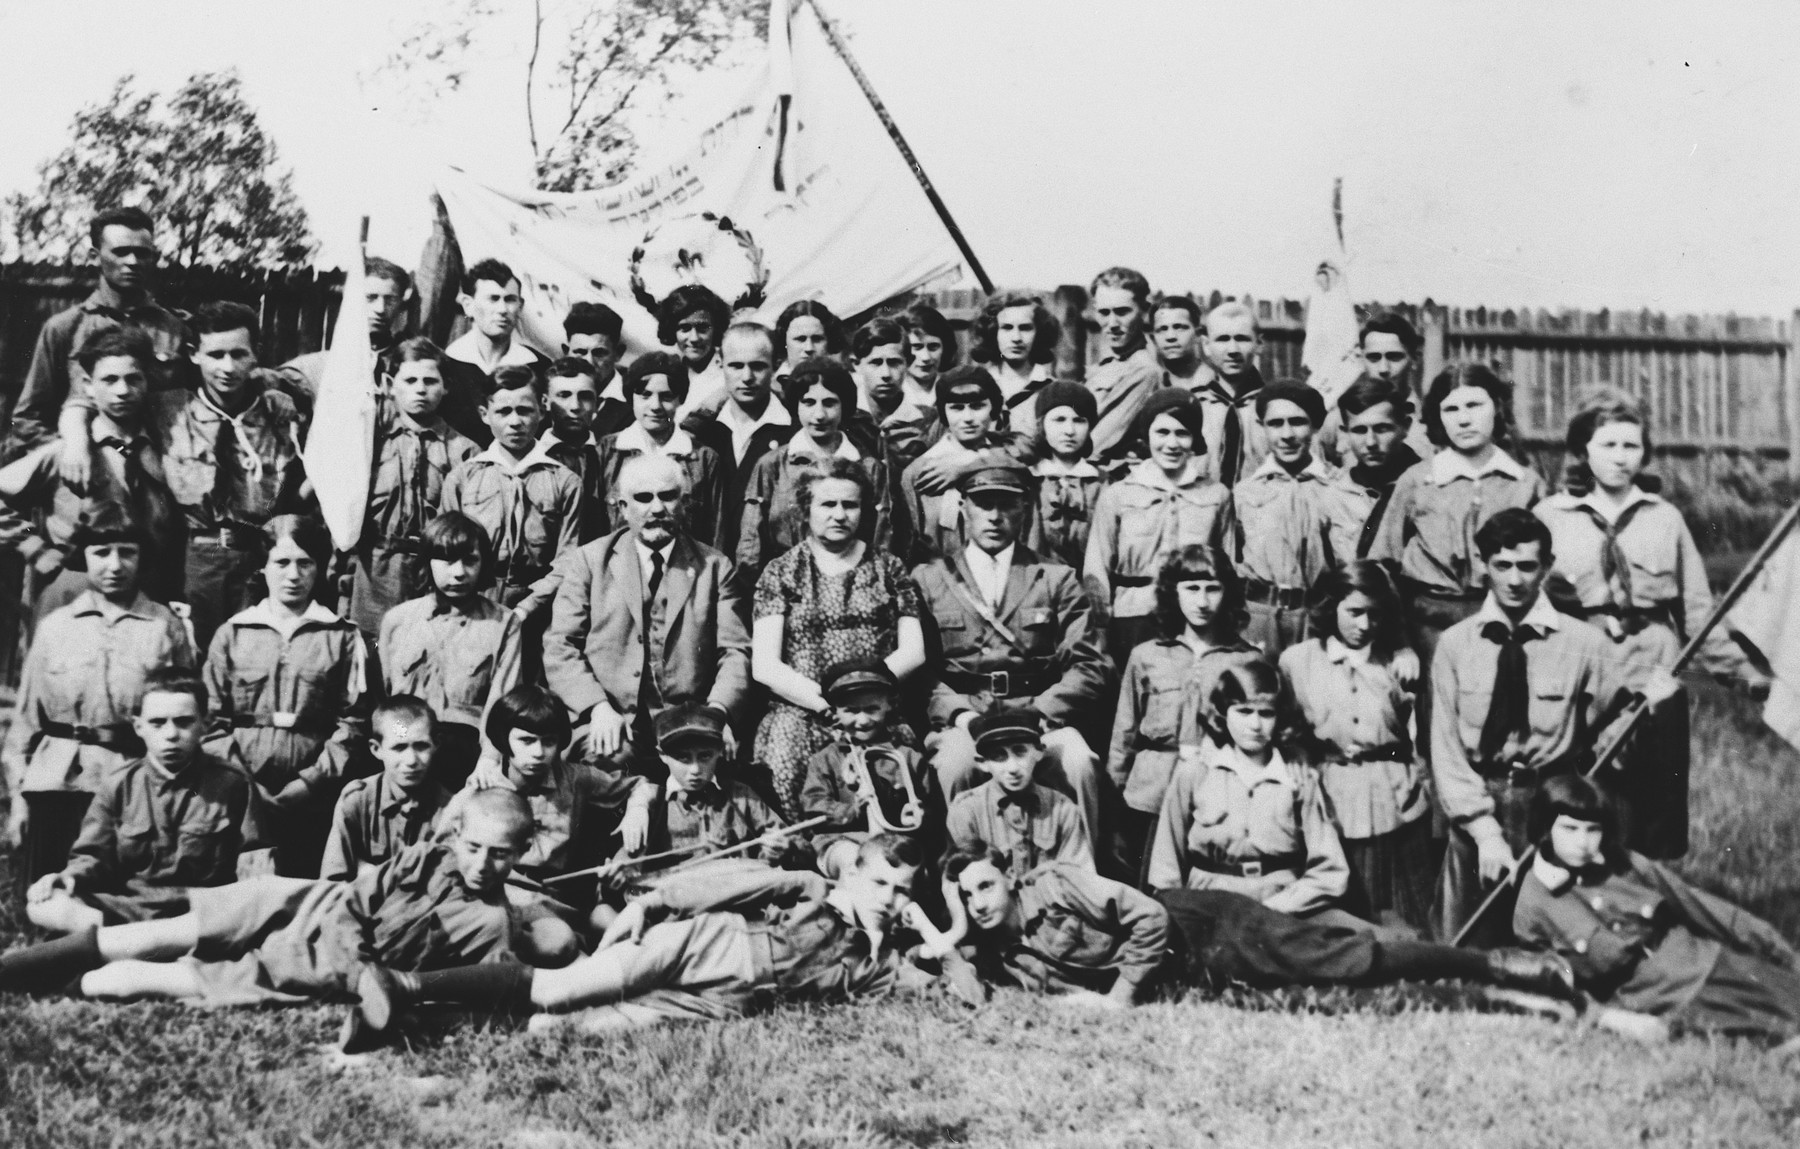 Children in a Zionist youth movement in Dabrowa Gornicza pose with flags and bugles.